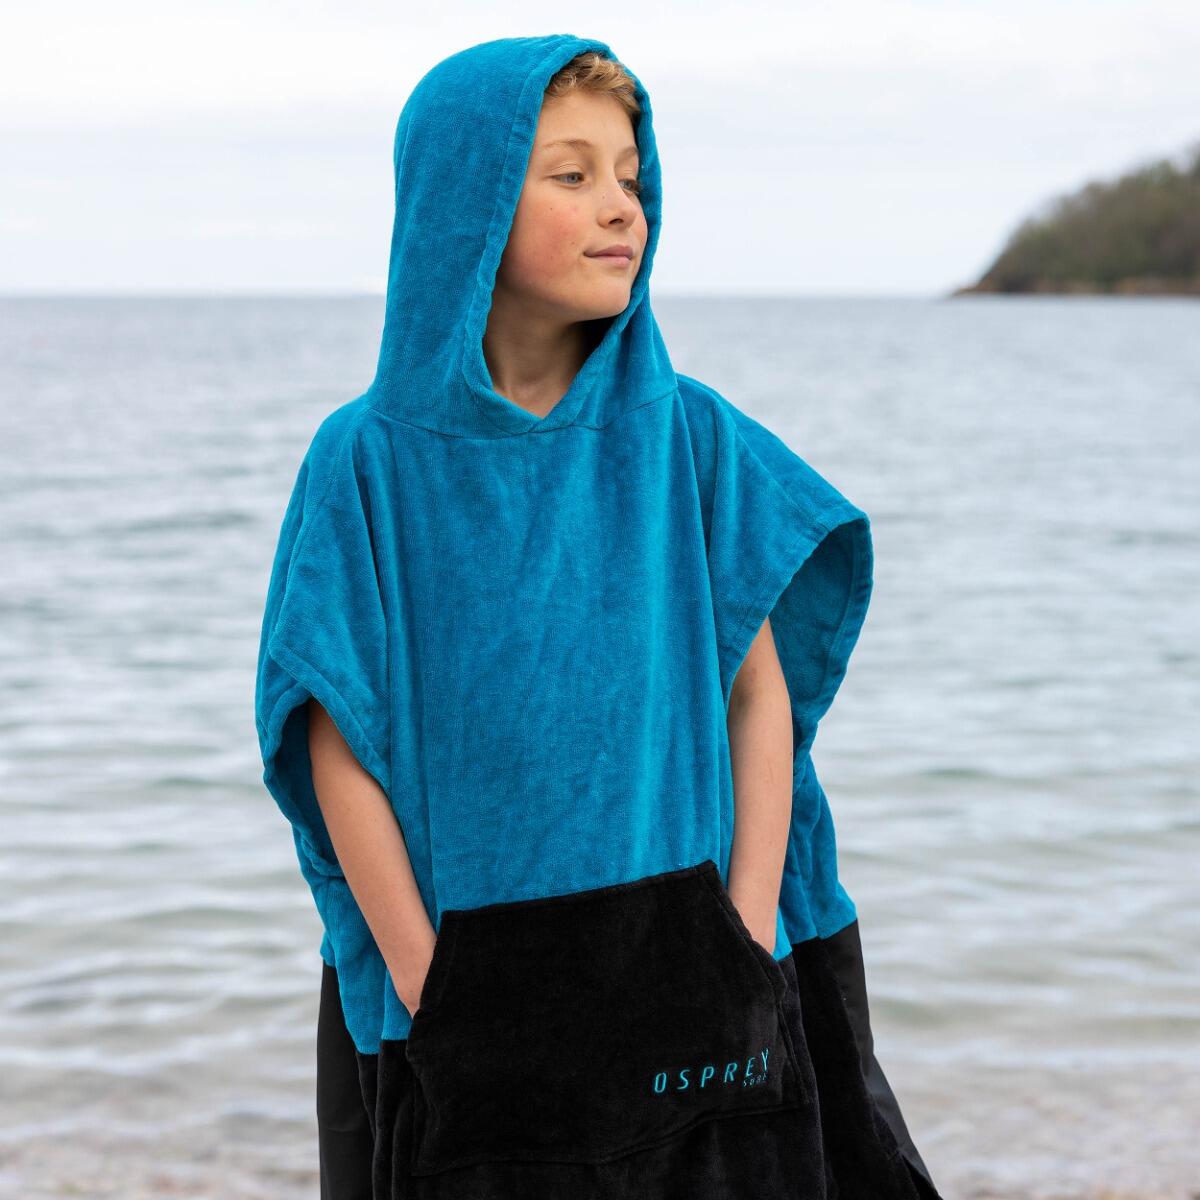 Osprey Kids Surf Poncho Hooded Towel Beach Changing Robe, Blue One Size 2/4